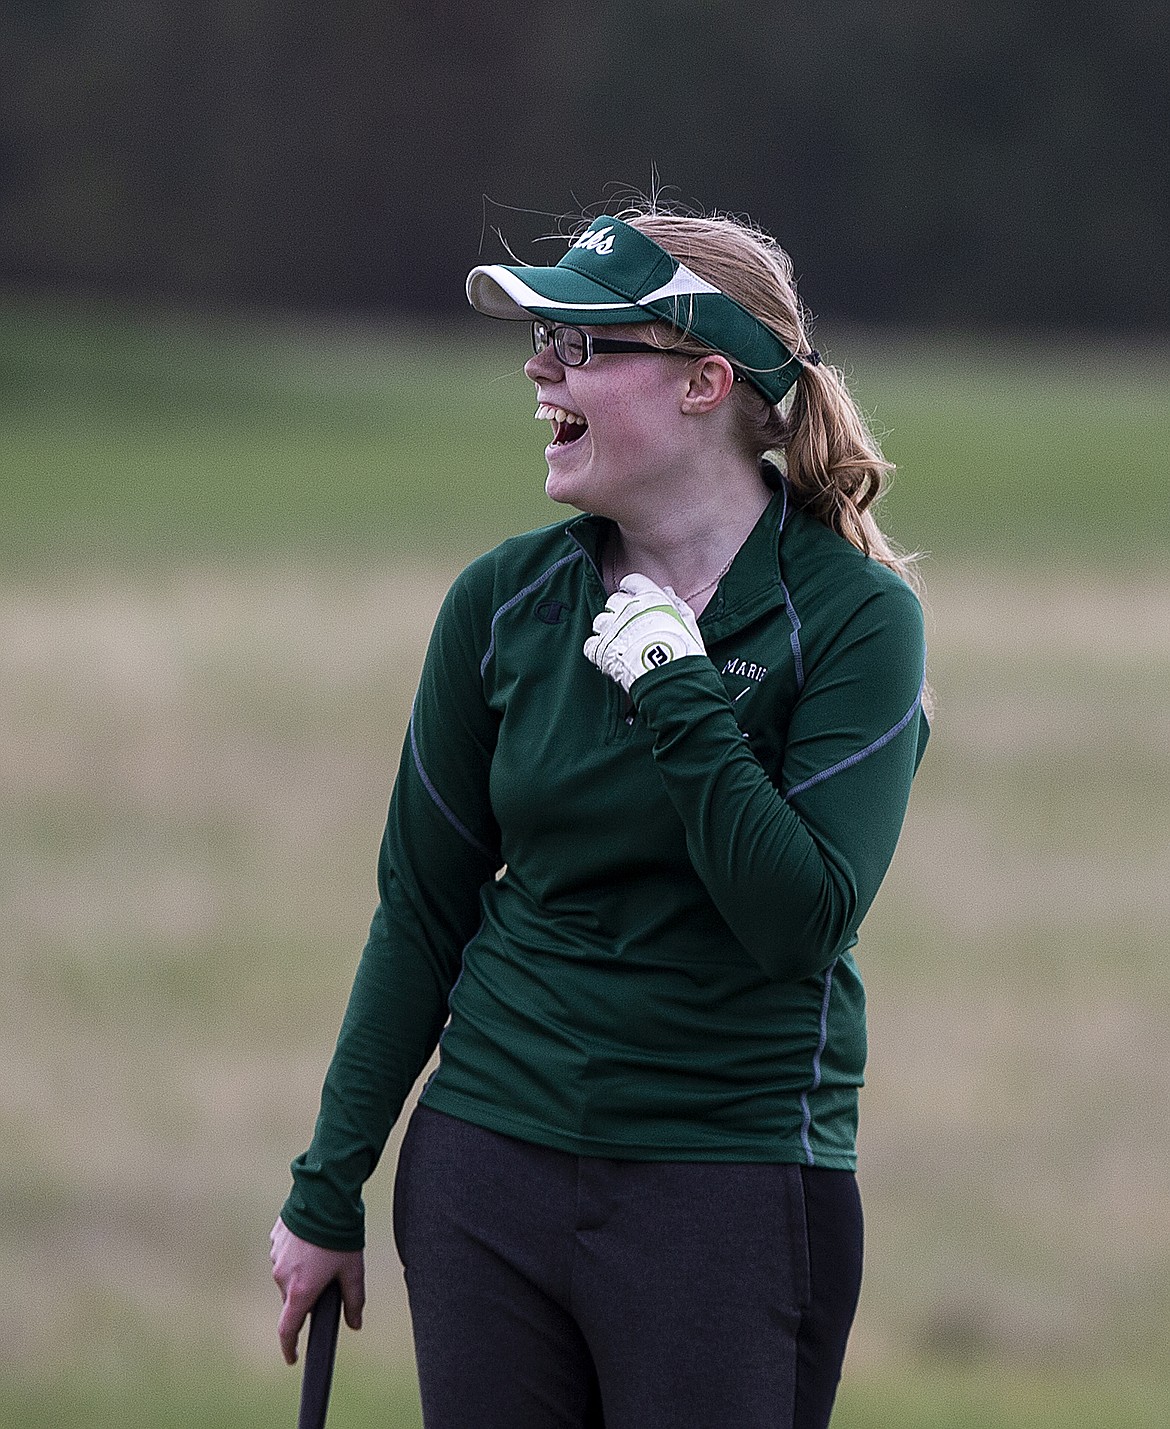 Tabitha Boller of St. Maries smiles after making a long putt on hole one Monday morning at the 2A District 1 tournament at The Links Golf Club. (LOREN BENOIT/Press)